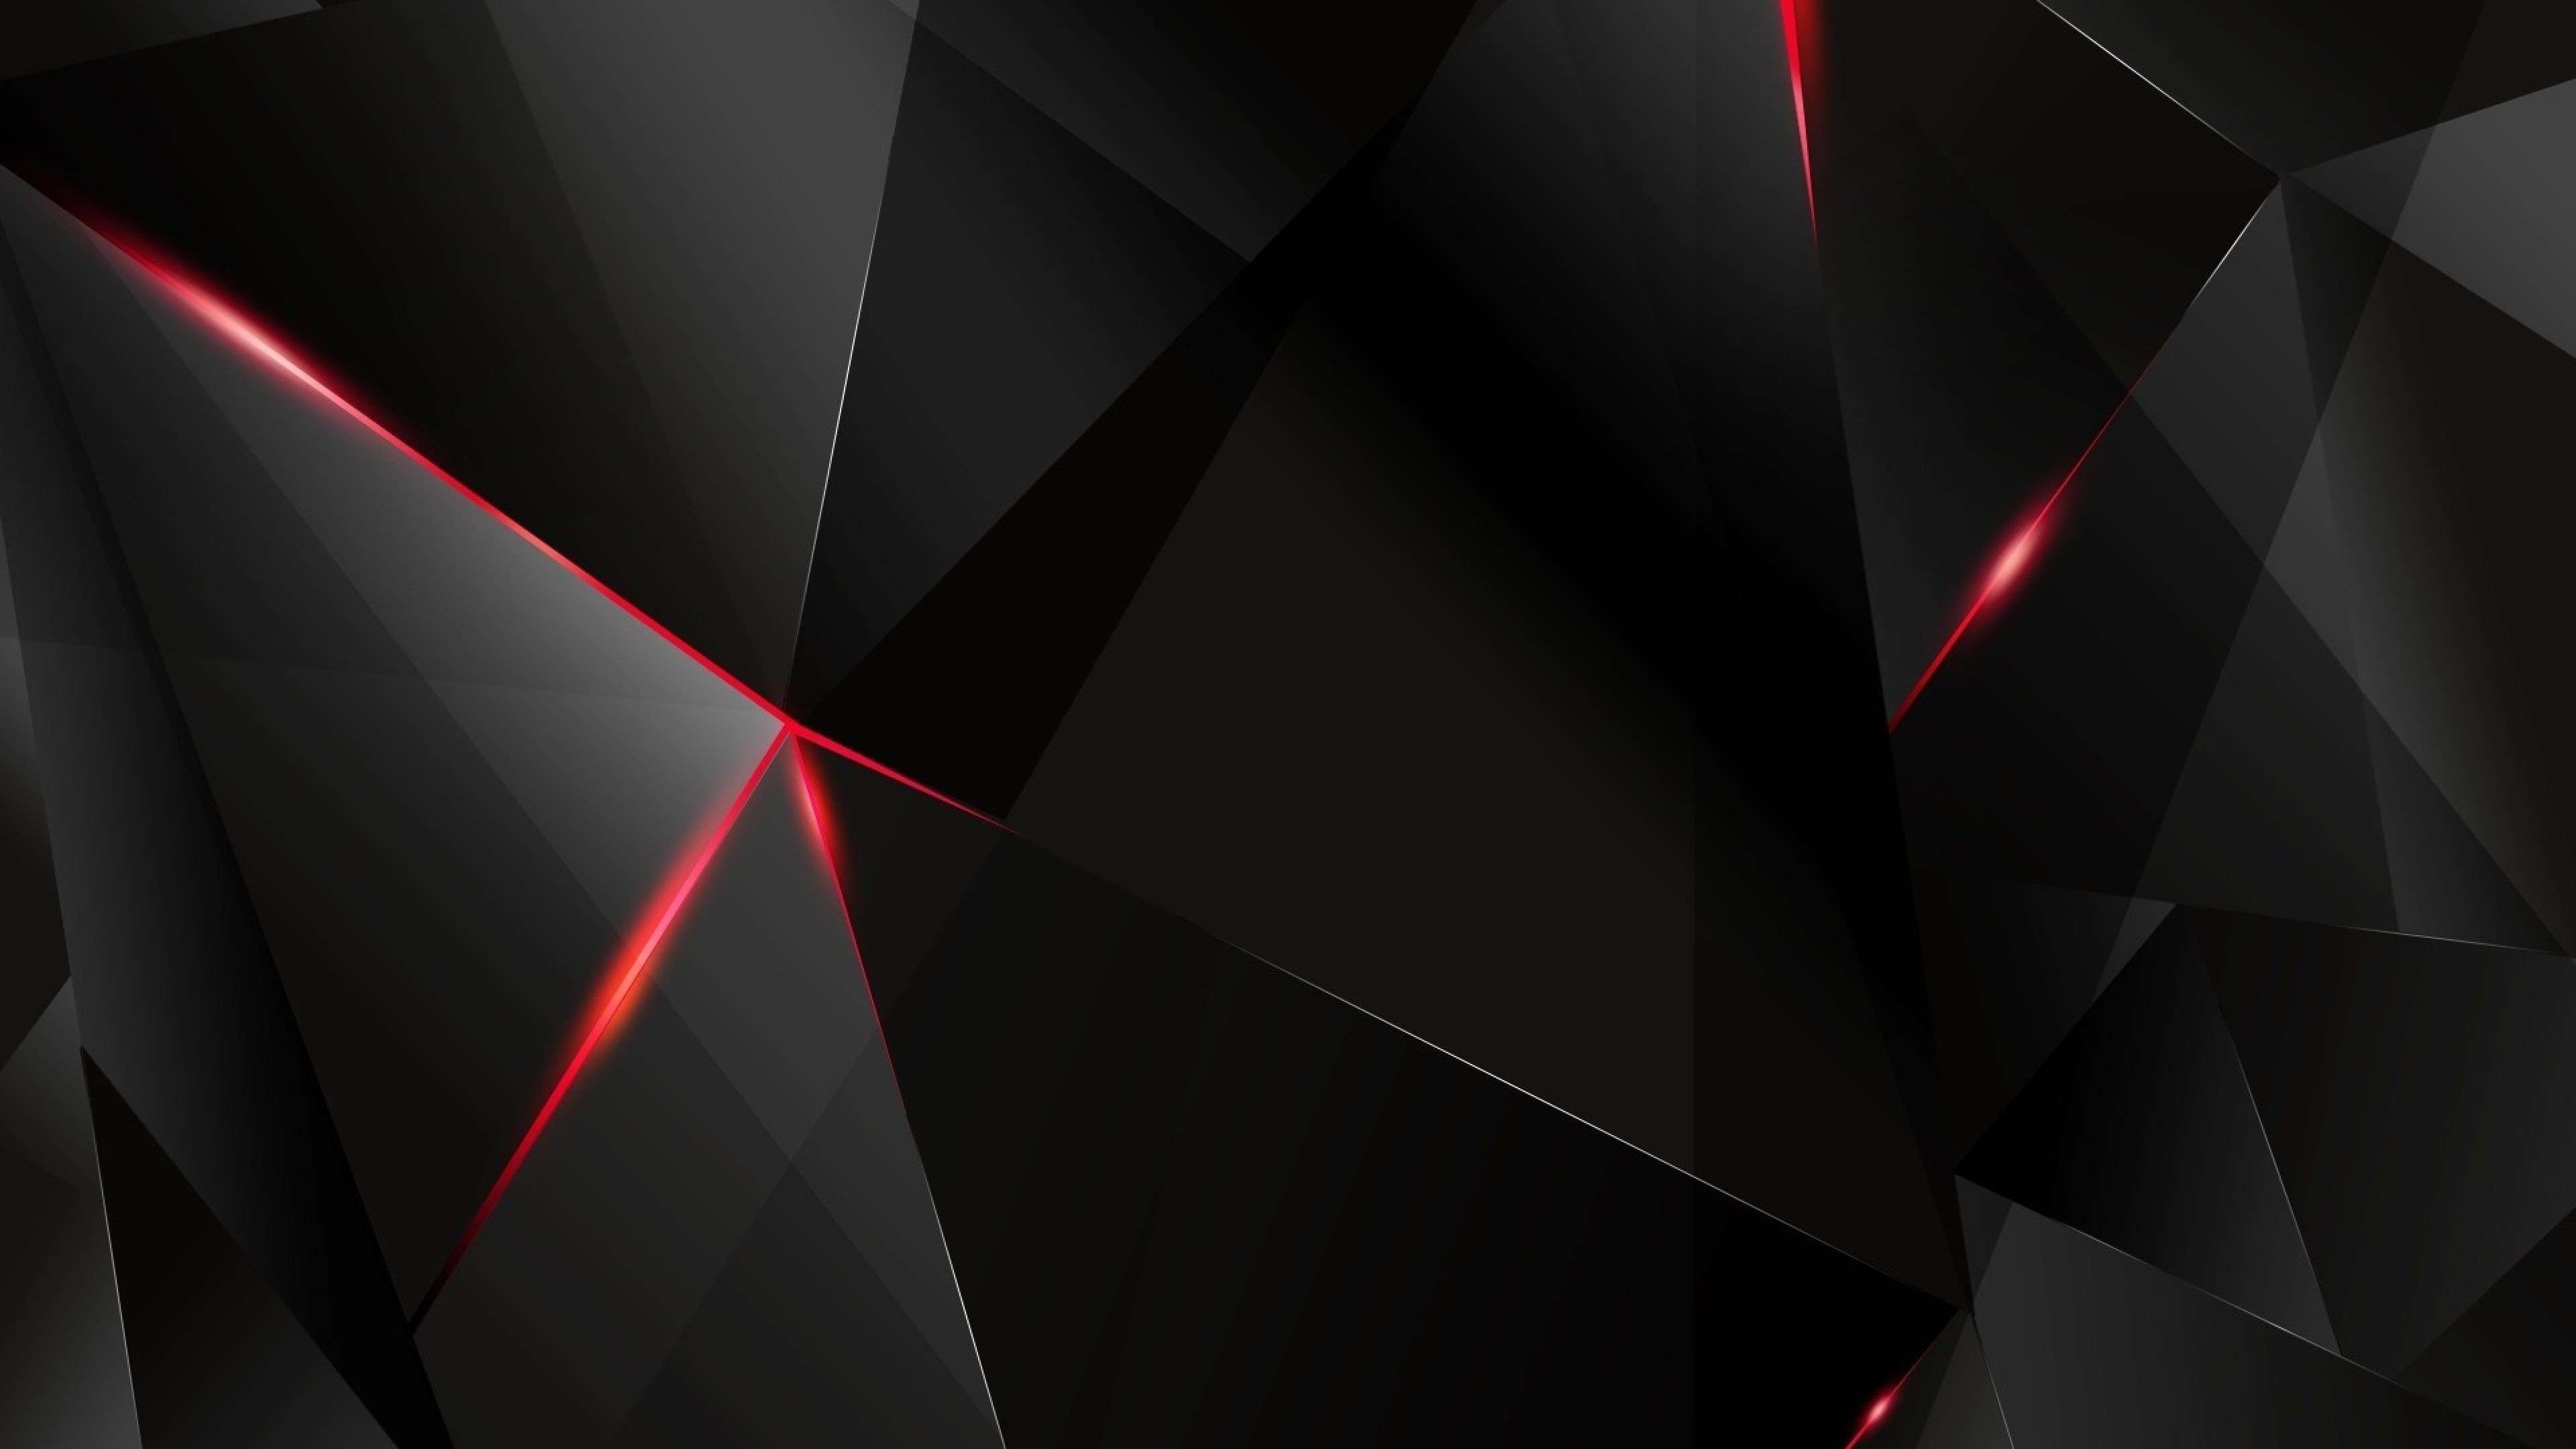 4k Wallpaper Red And Black